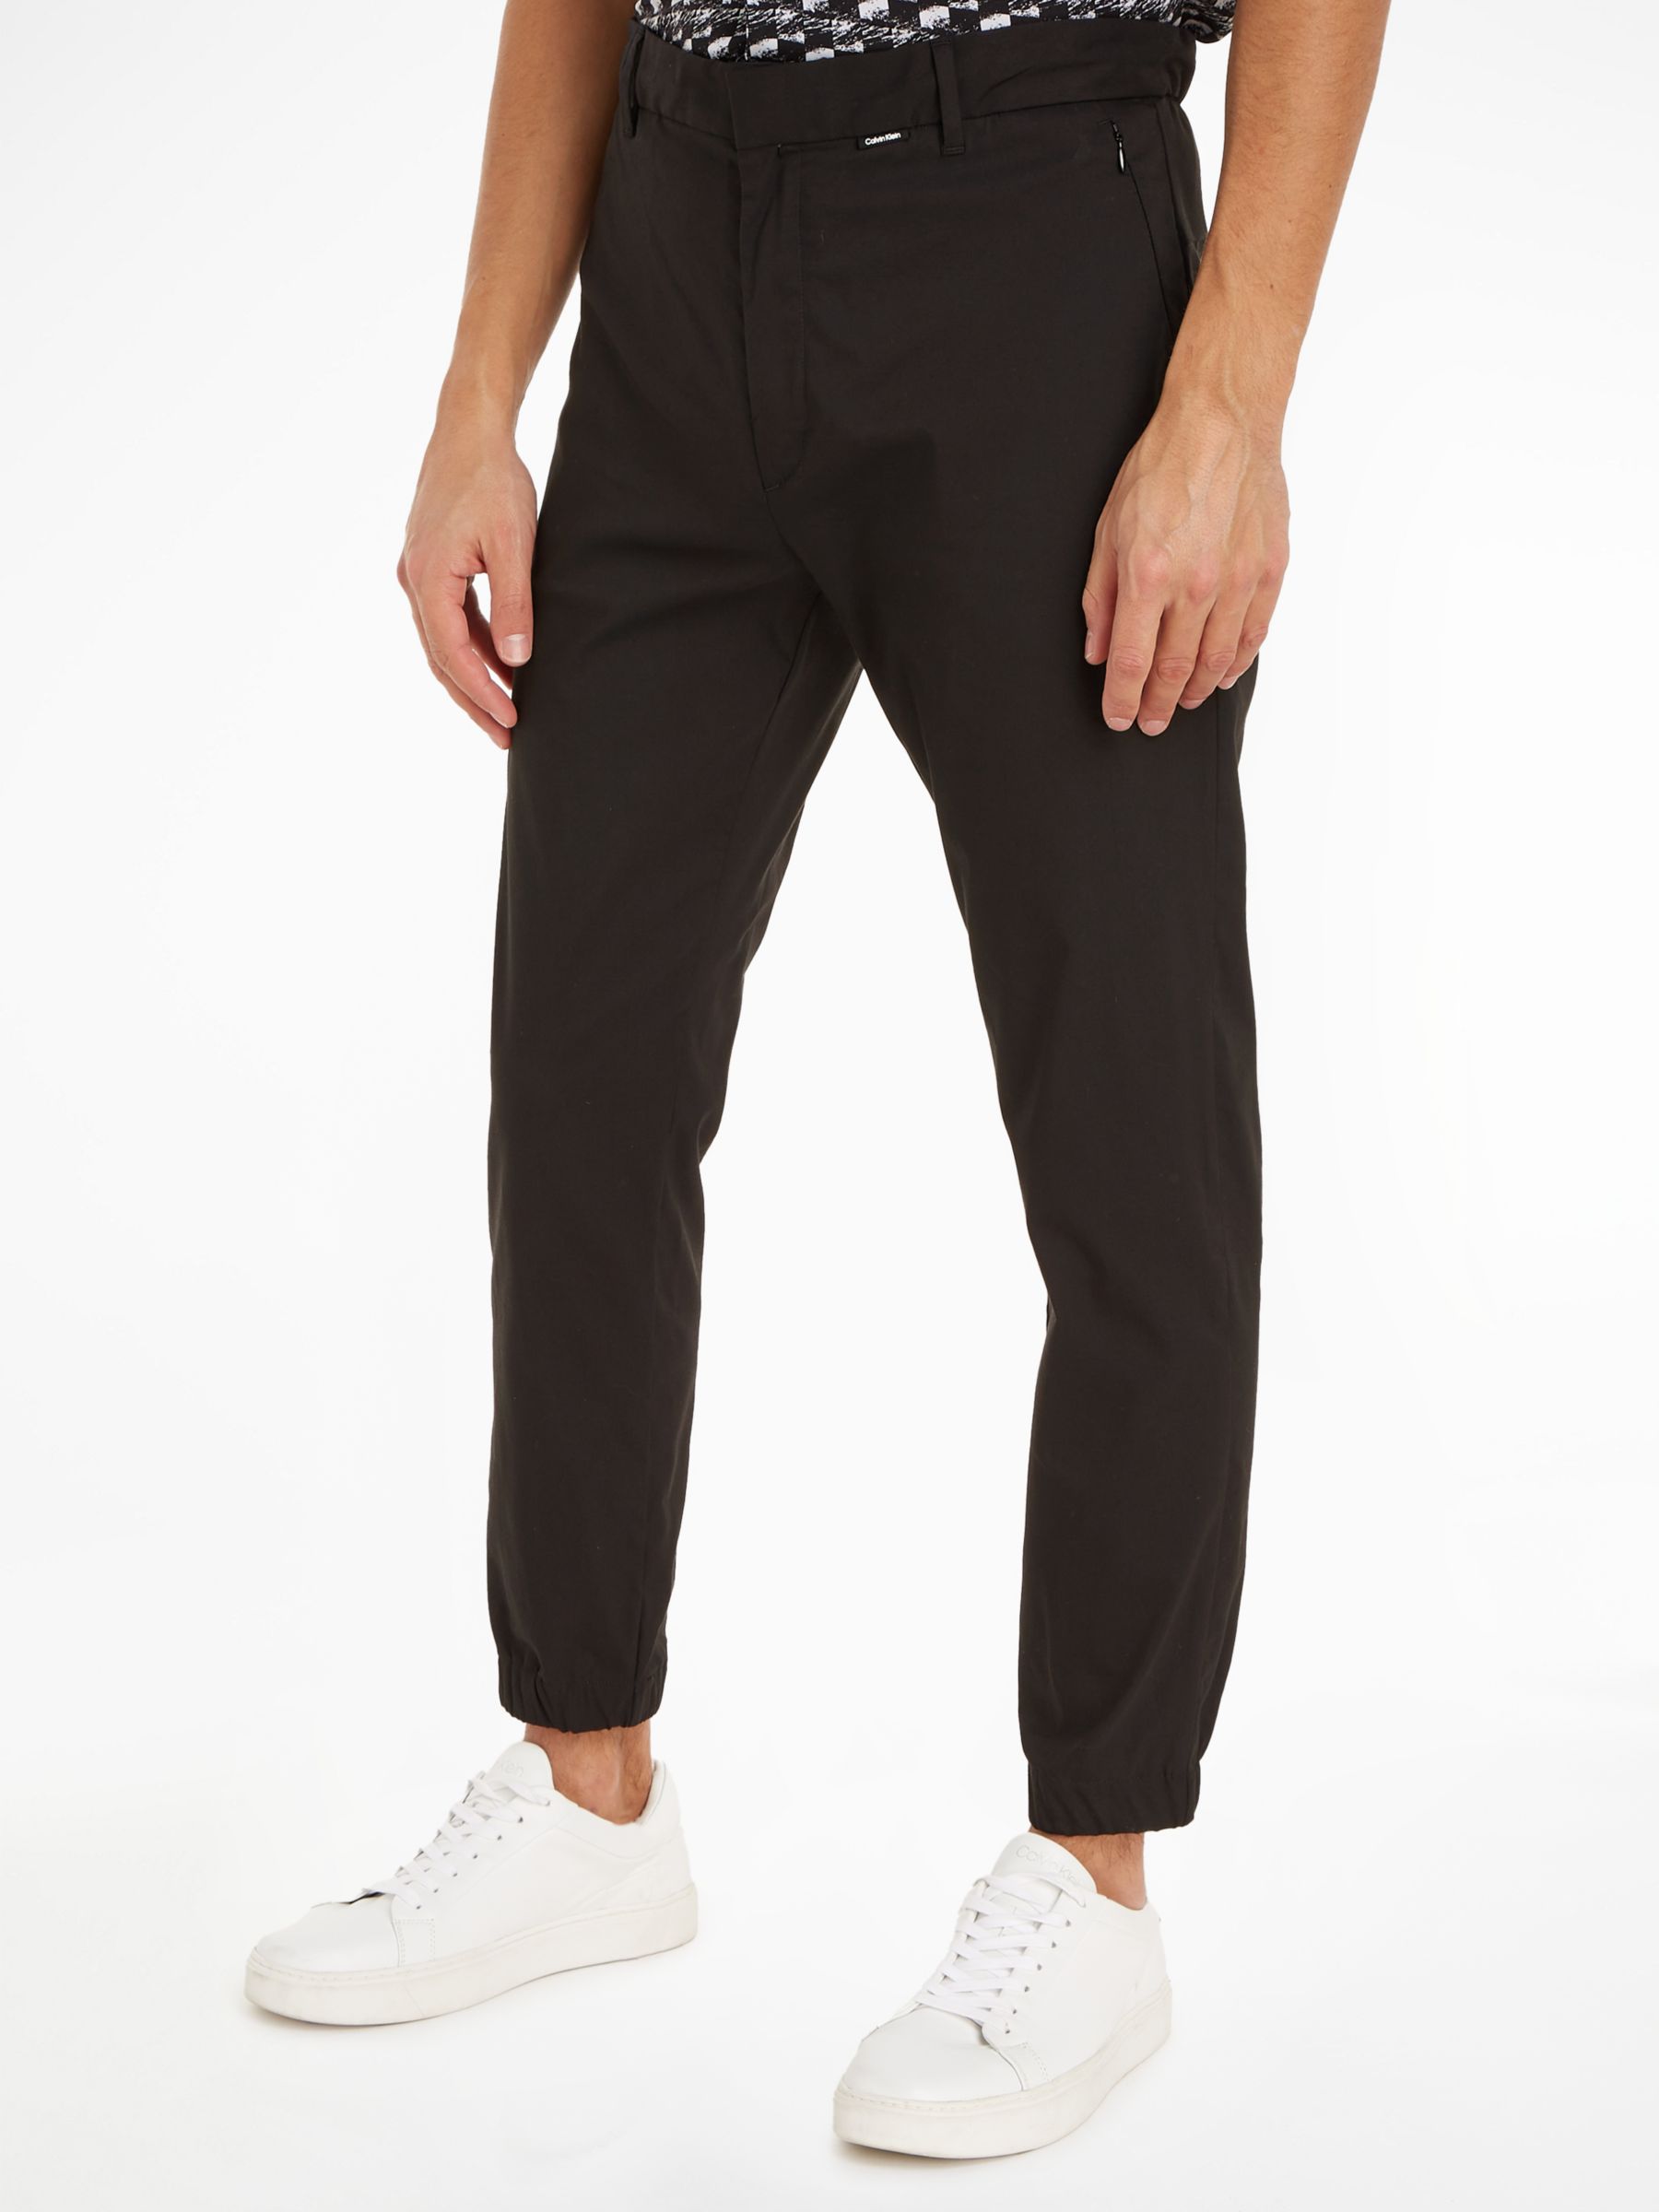 Calvin Klein Tapered Trousers, Black at John Lewis & Partners